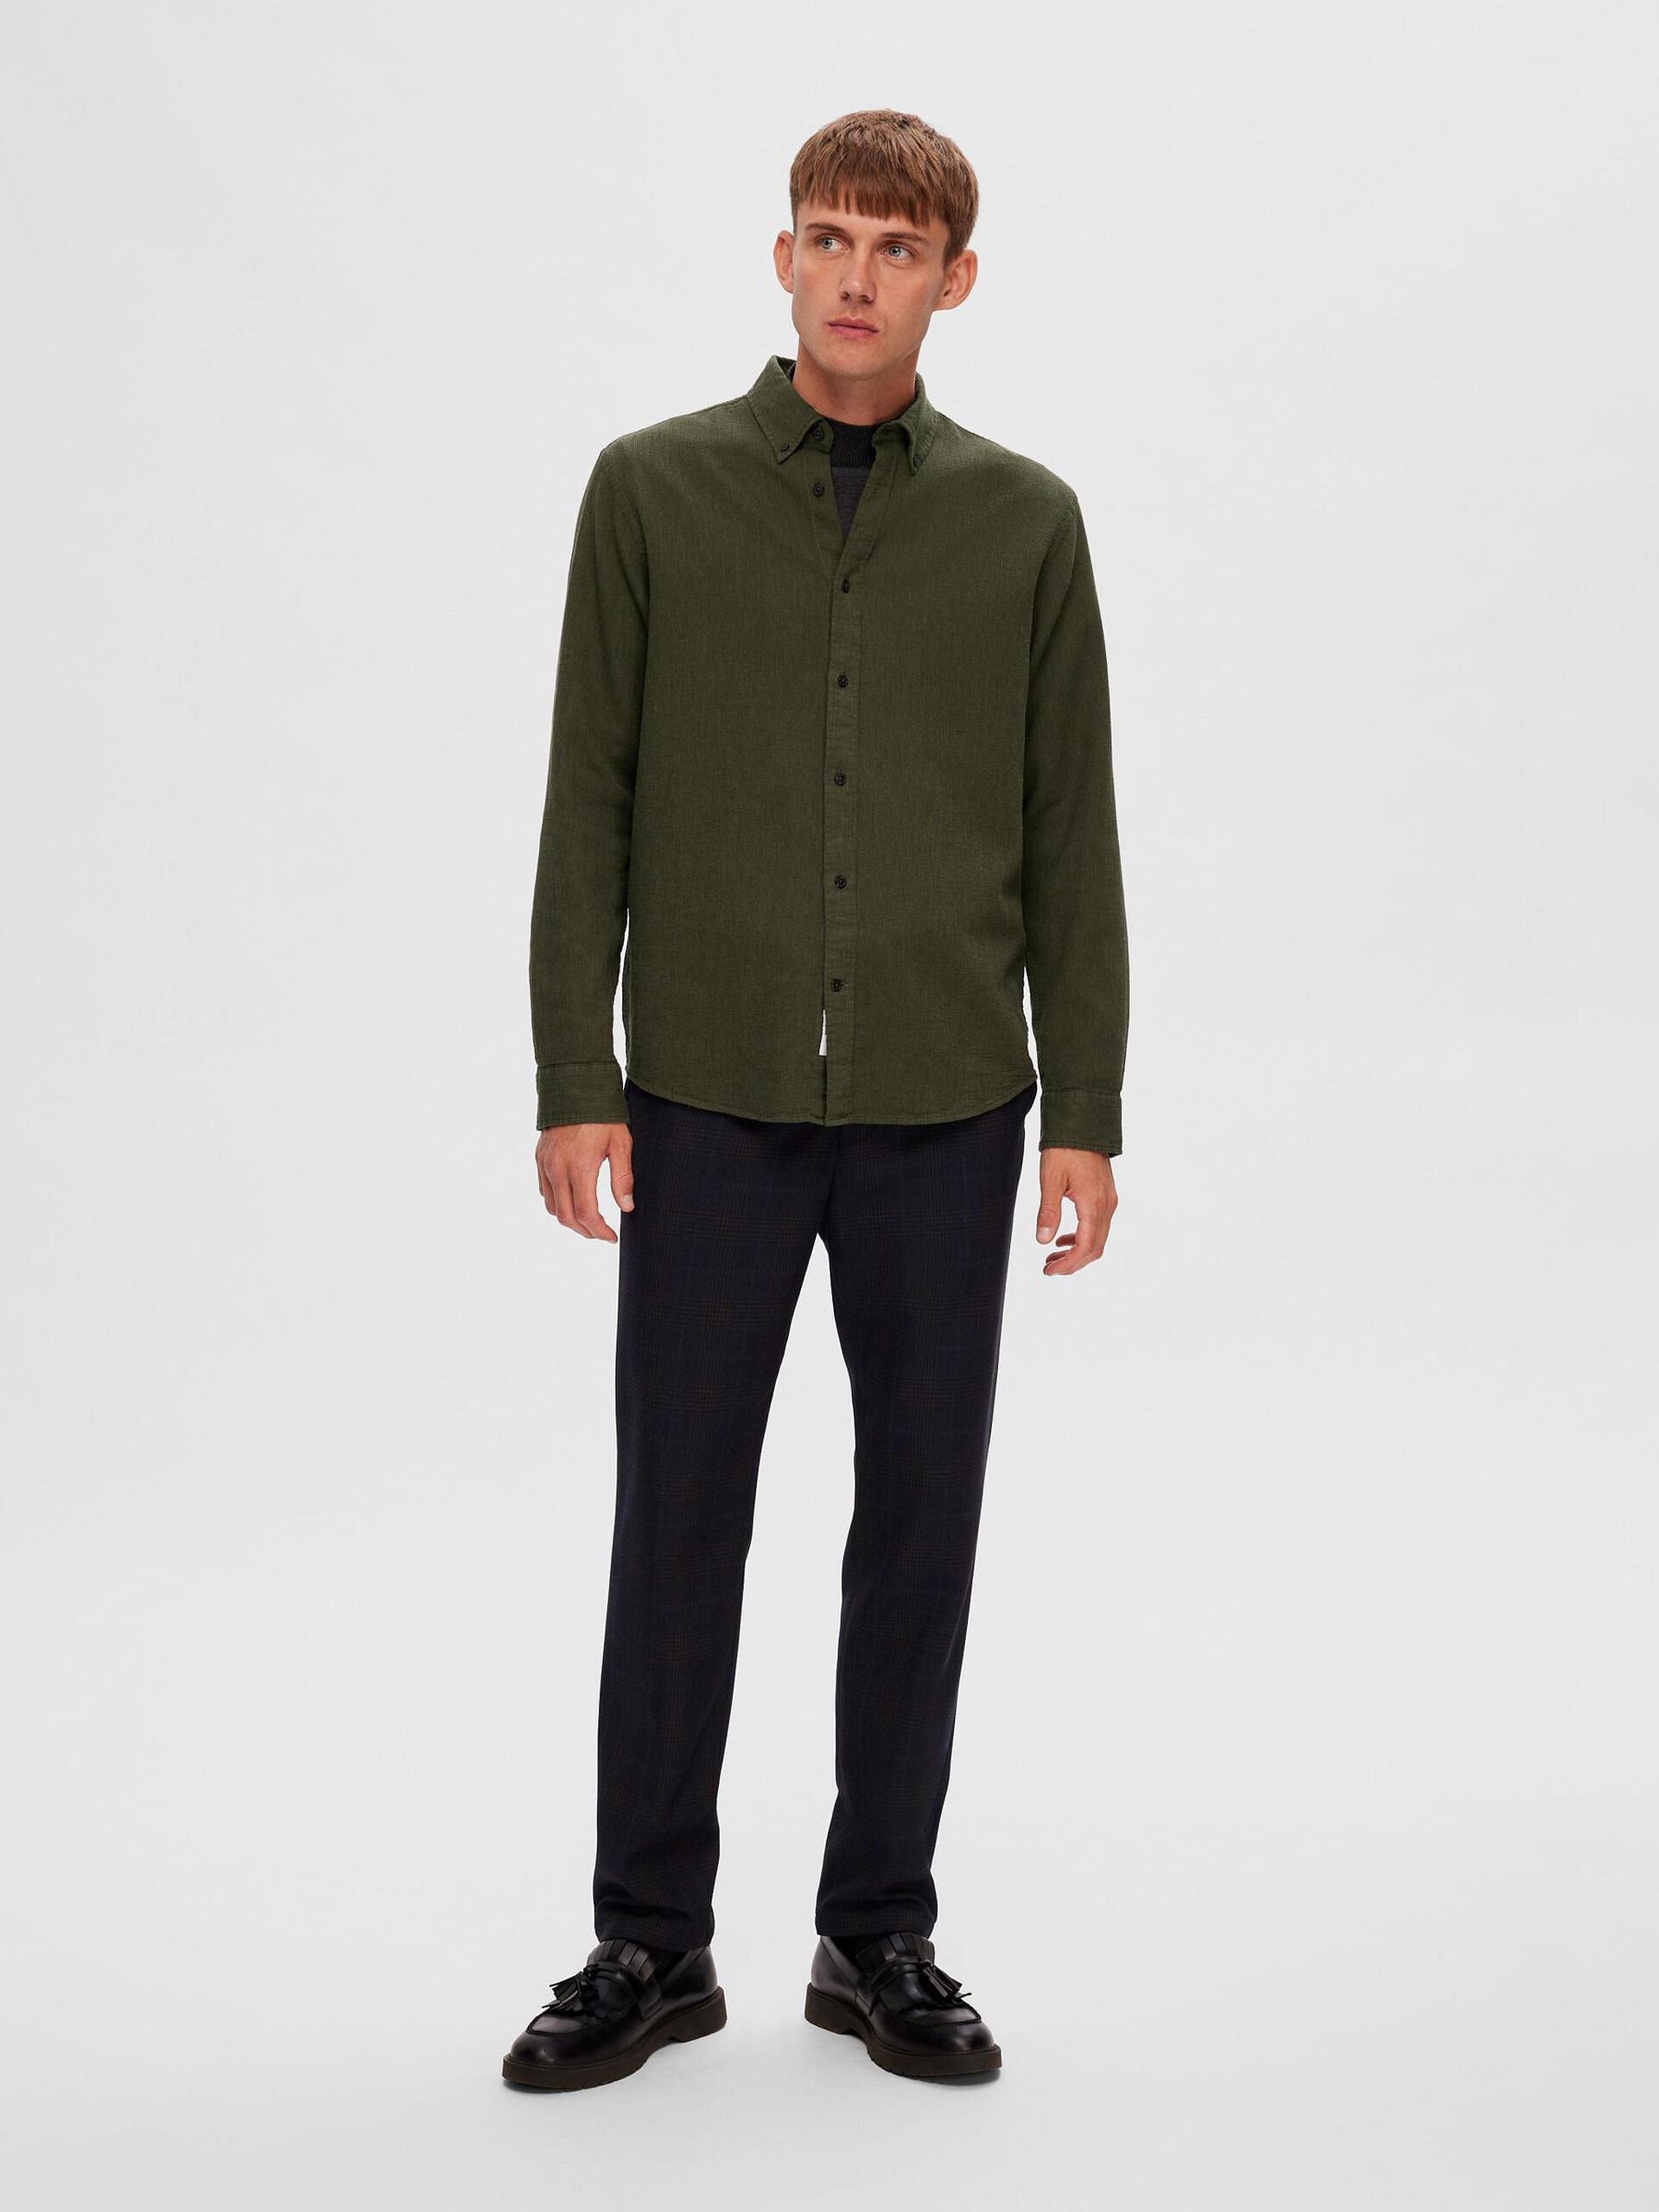 What is the best way to wear olive green pants with a black shirt? - Quora